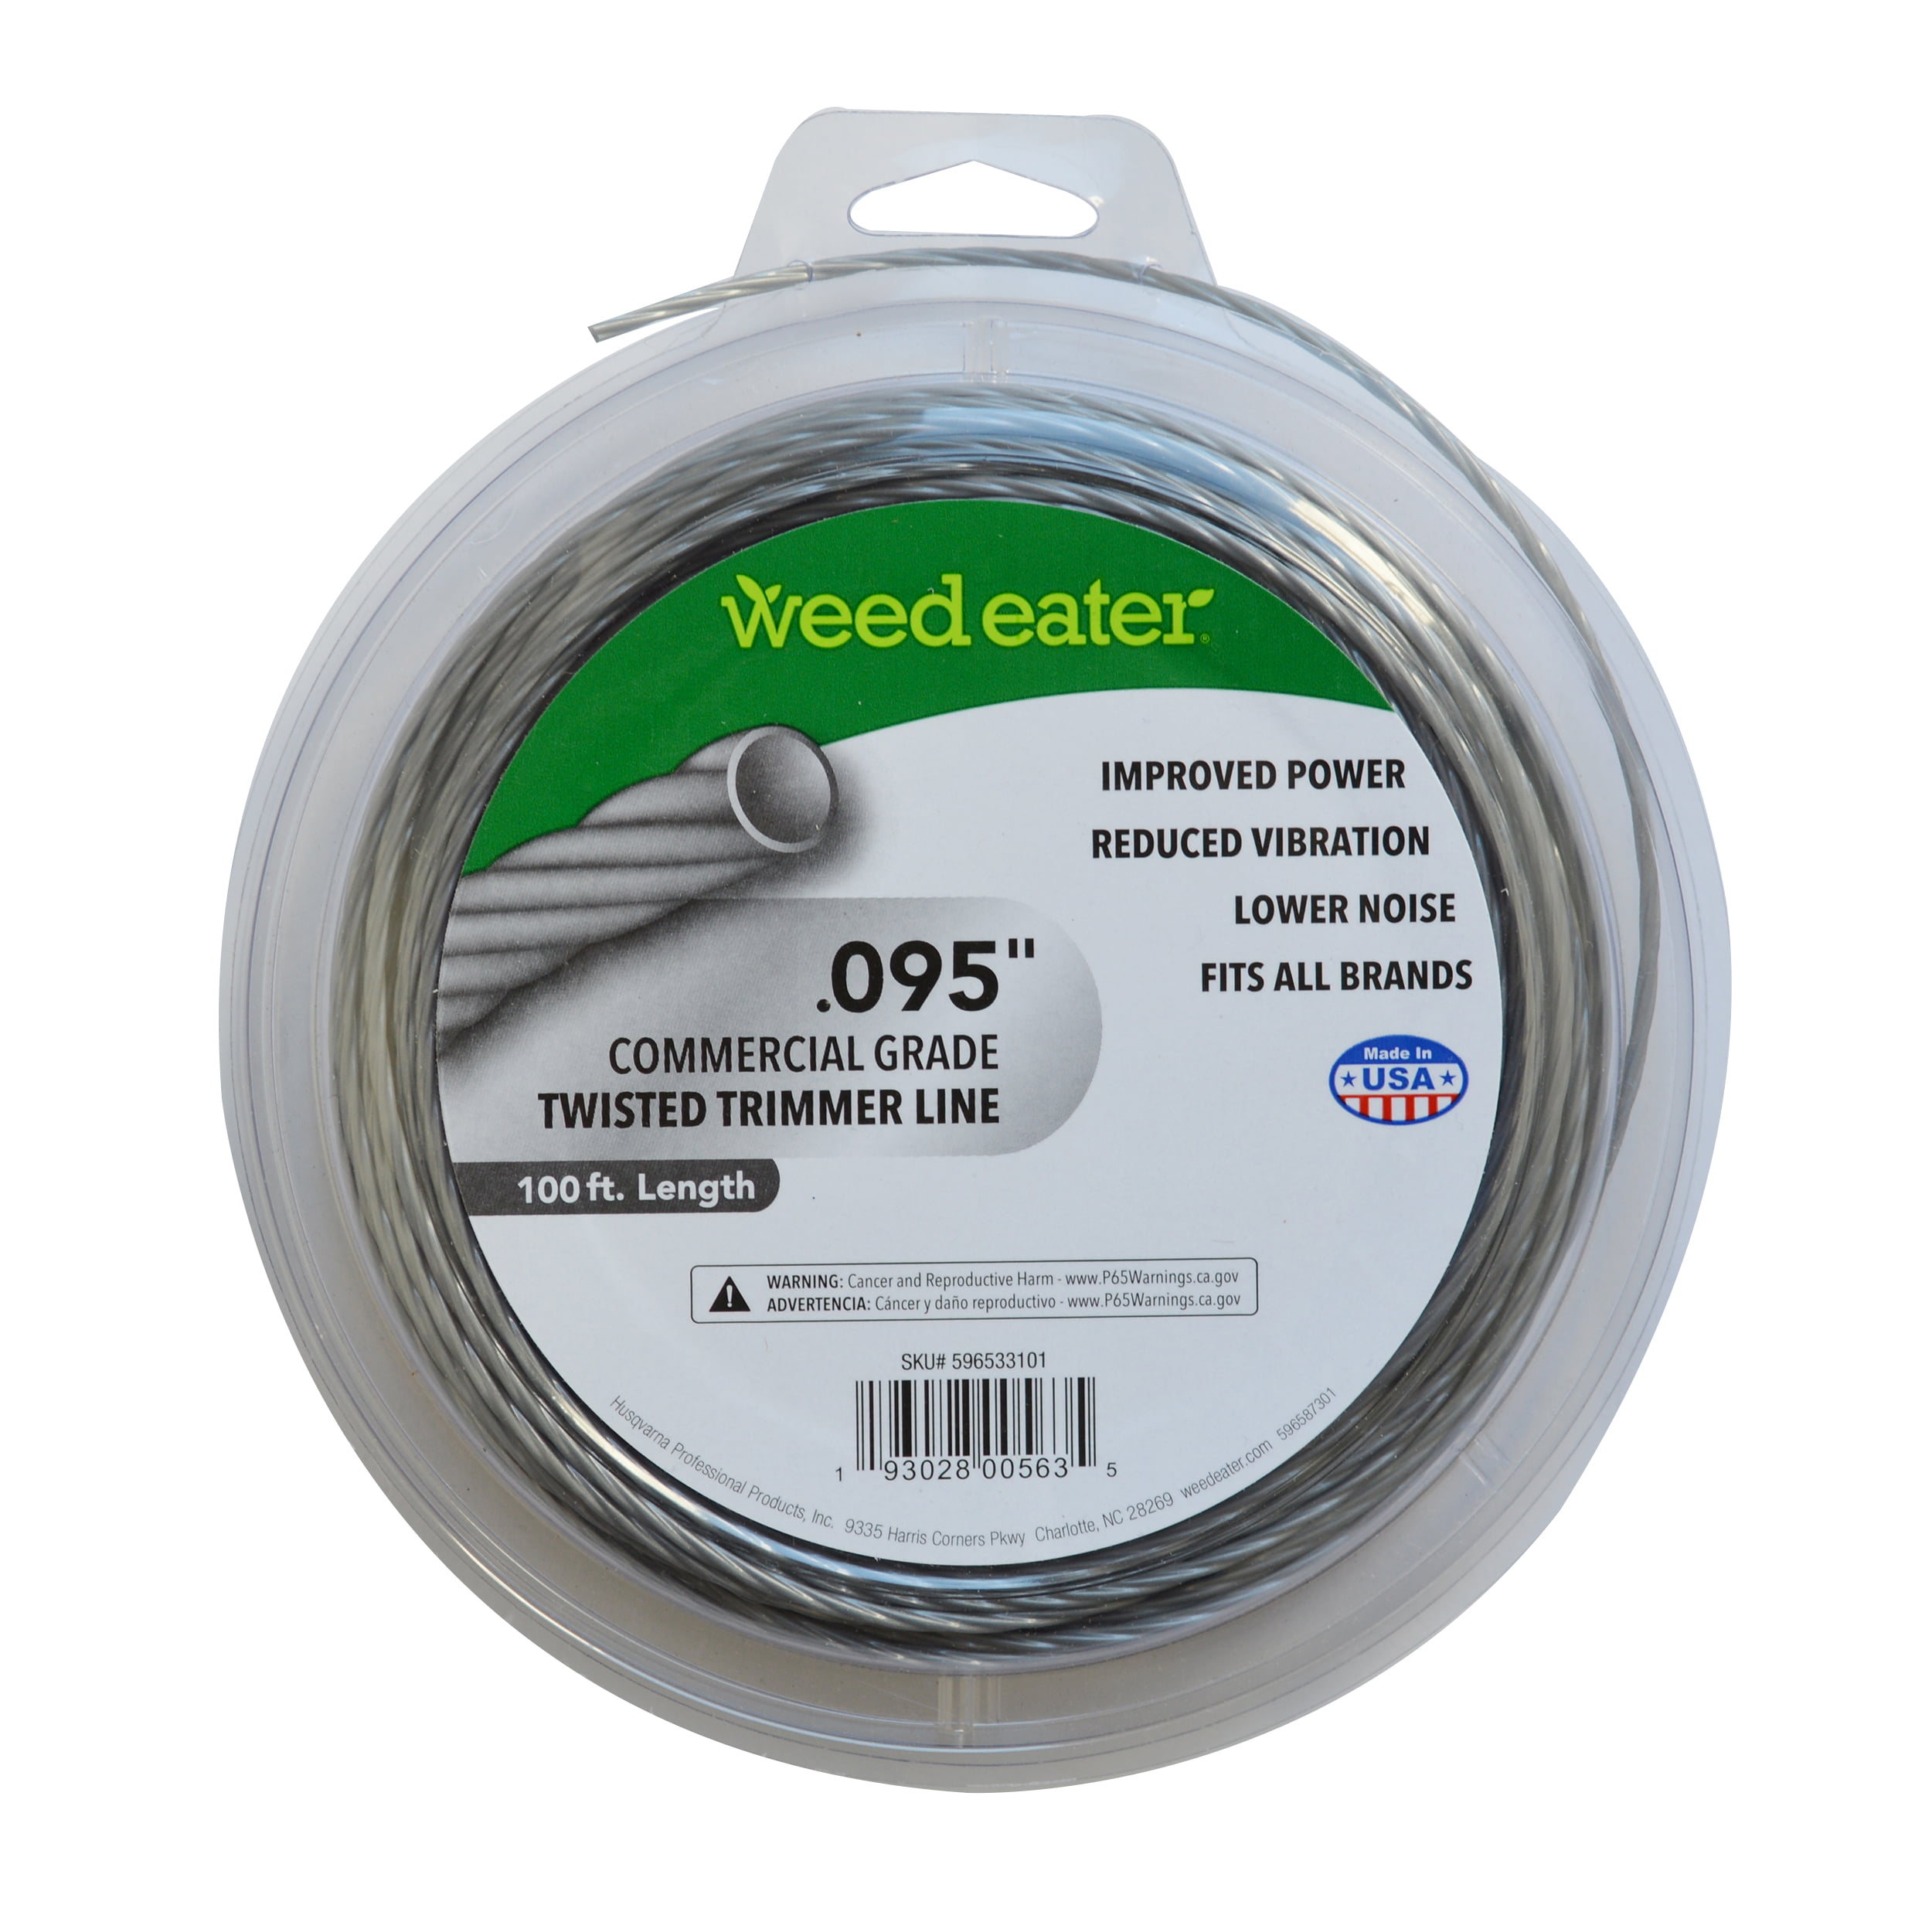 walmart weed eater prices